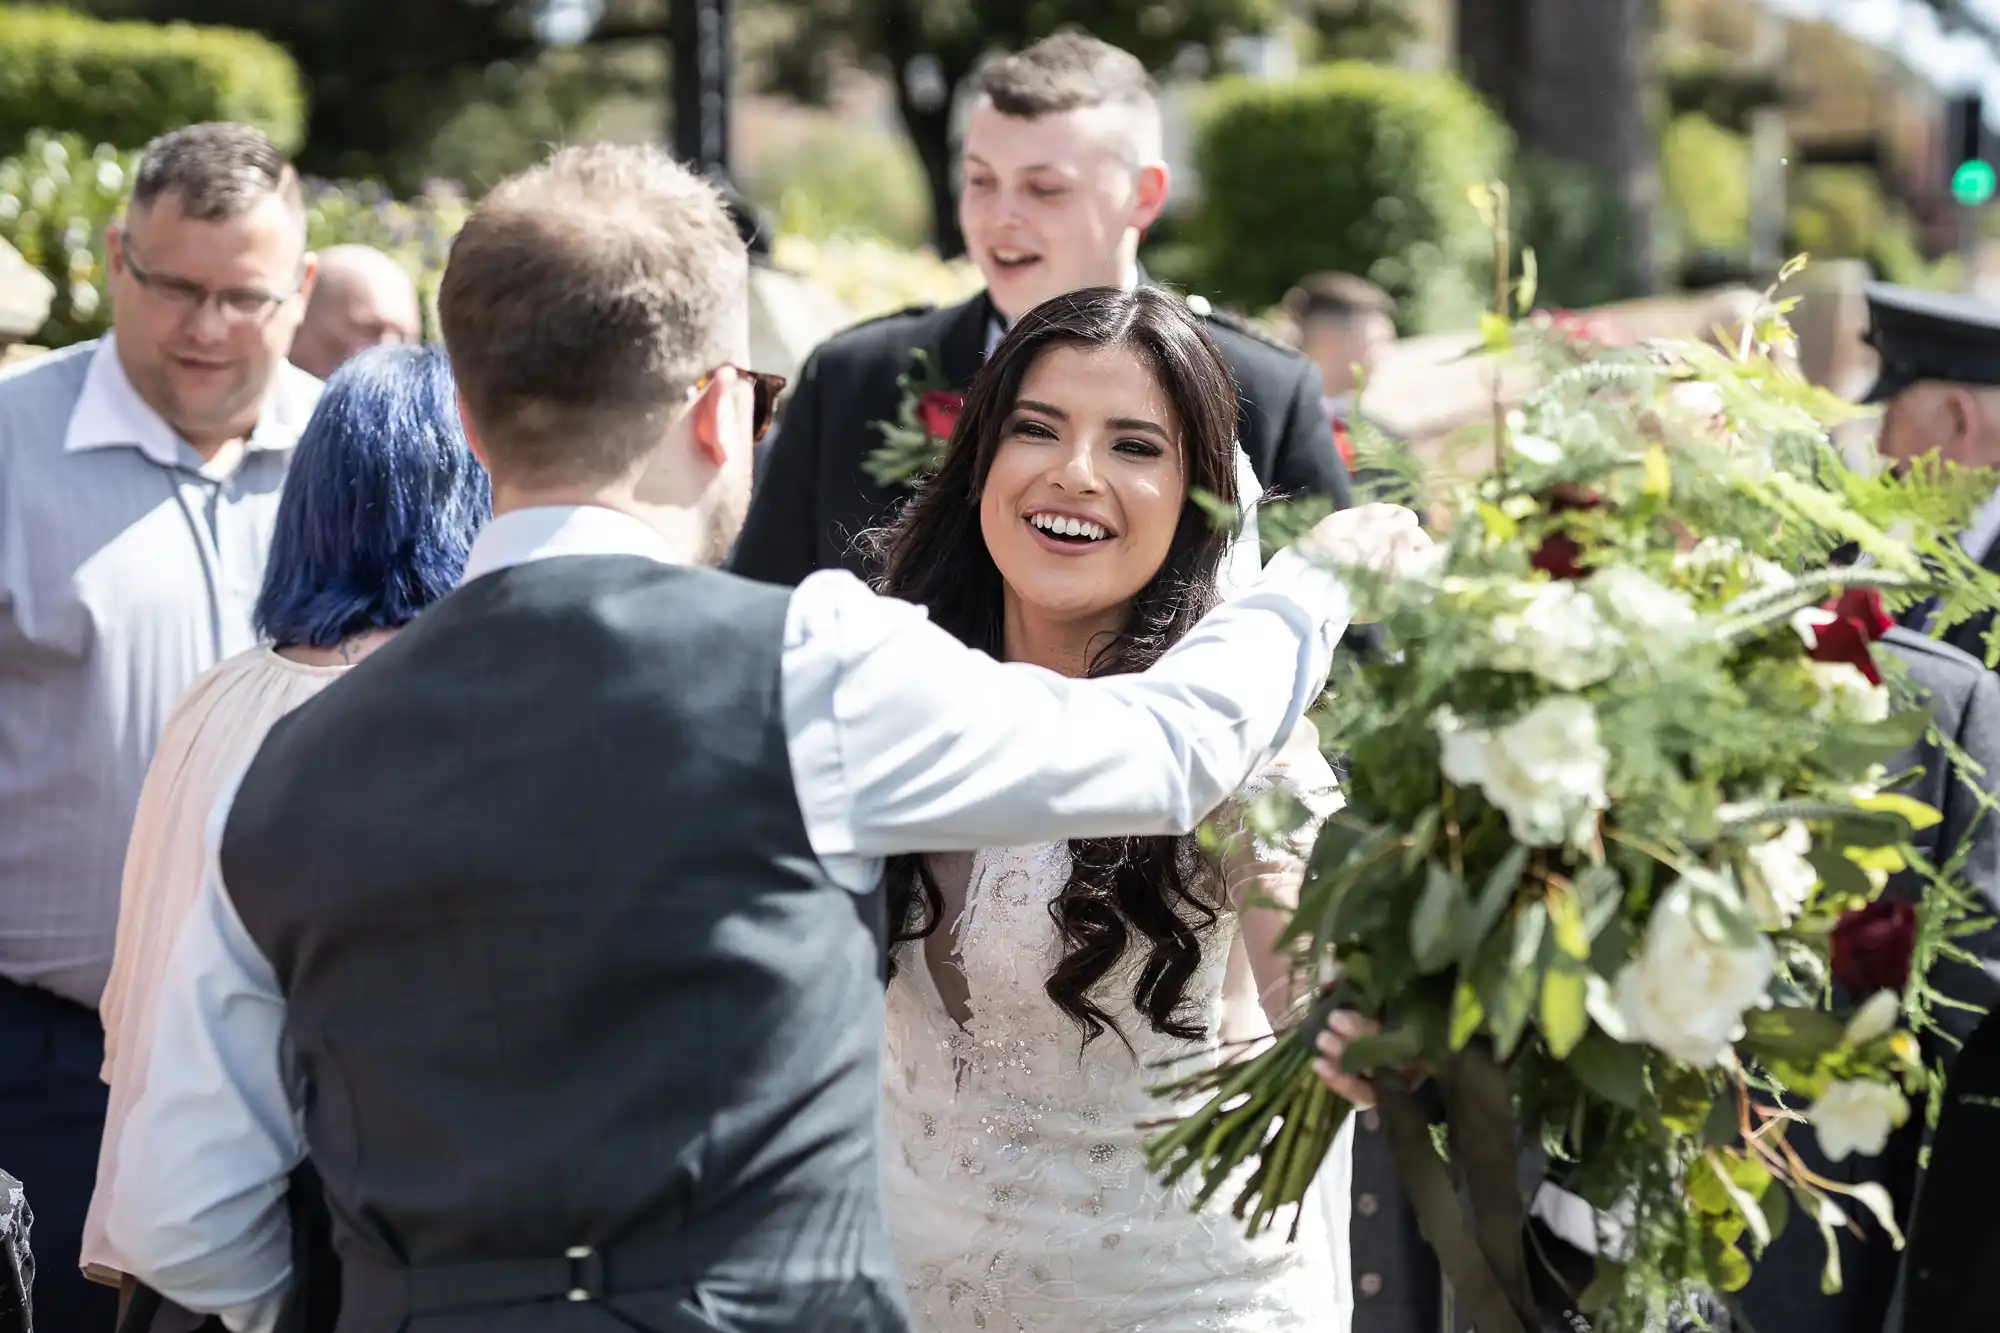 A bride in a white dress smiling and reaching out to a groom, surrounded by guests and floral arrangements on a sunny day.